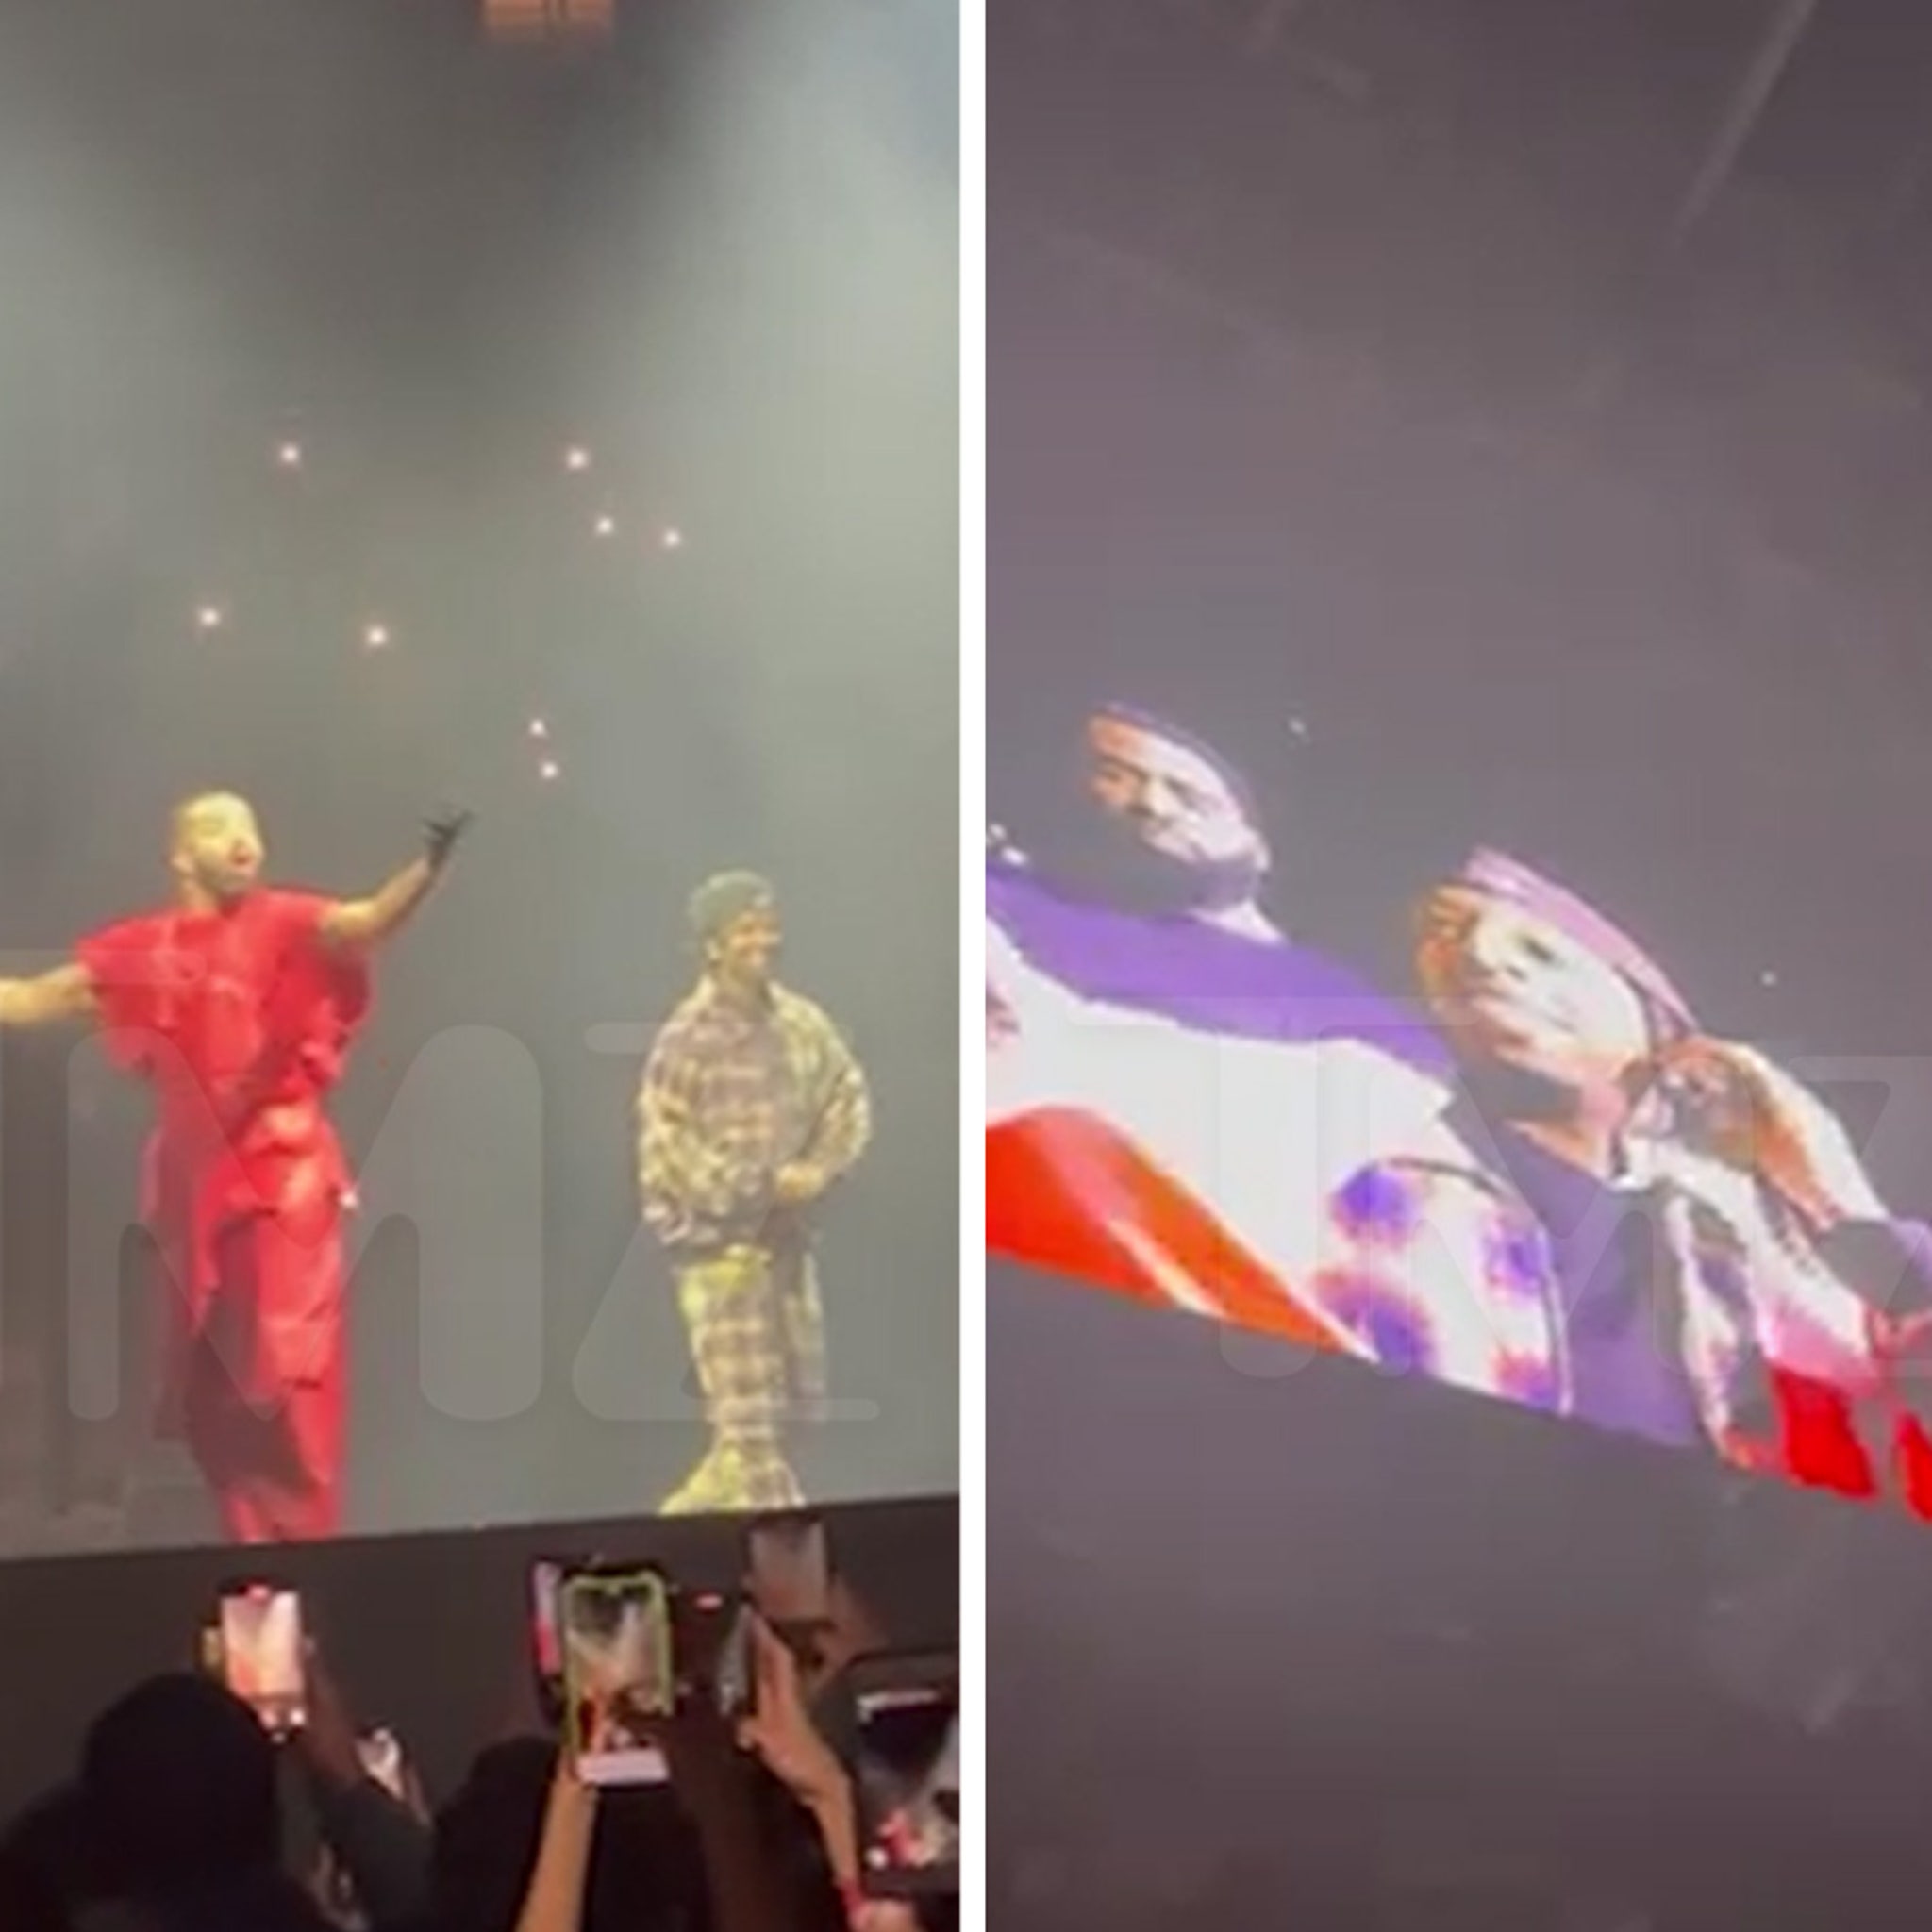 21 Savage misses Drake's Toronto concert and is replaced by Lil